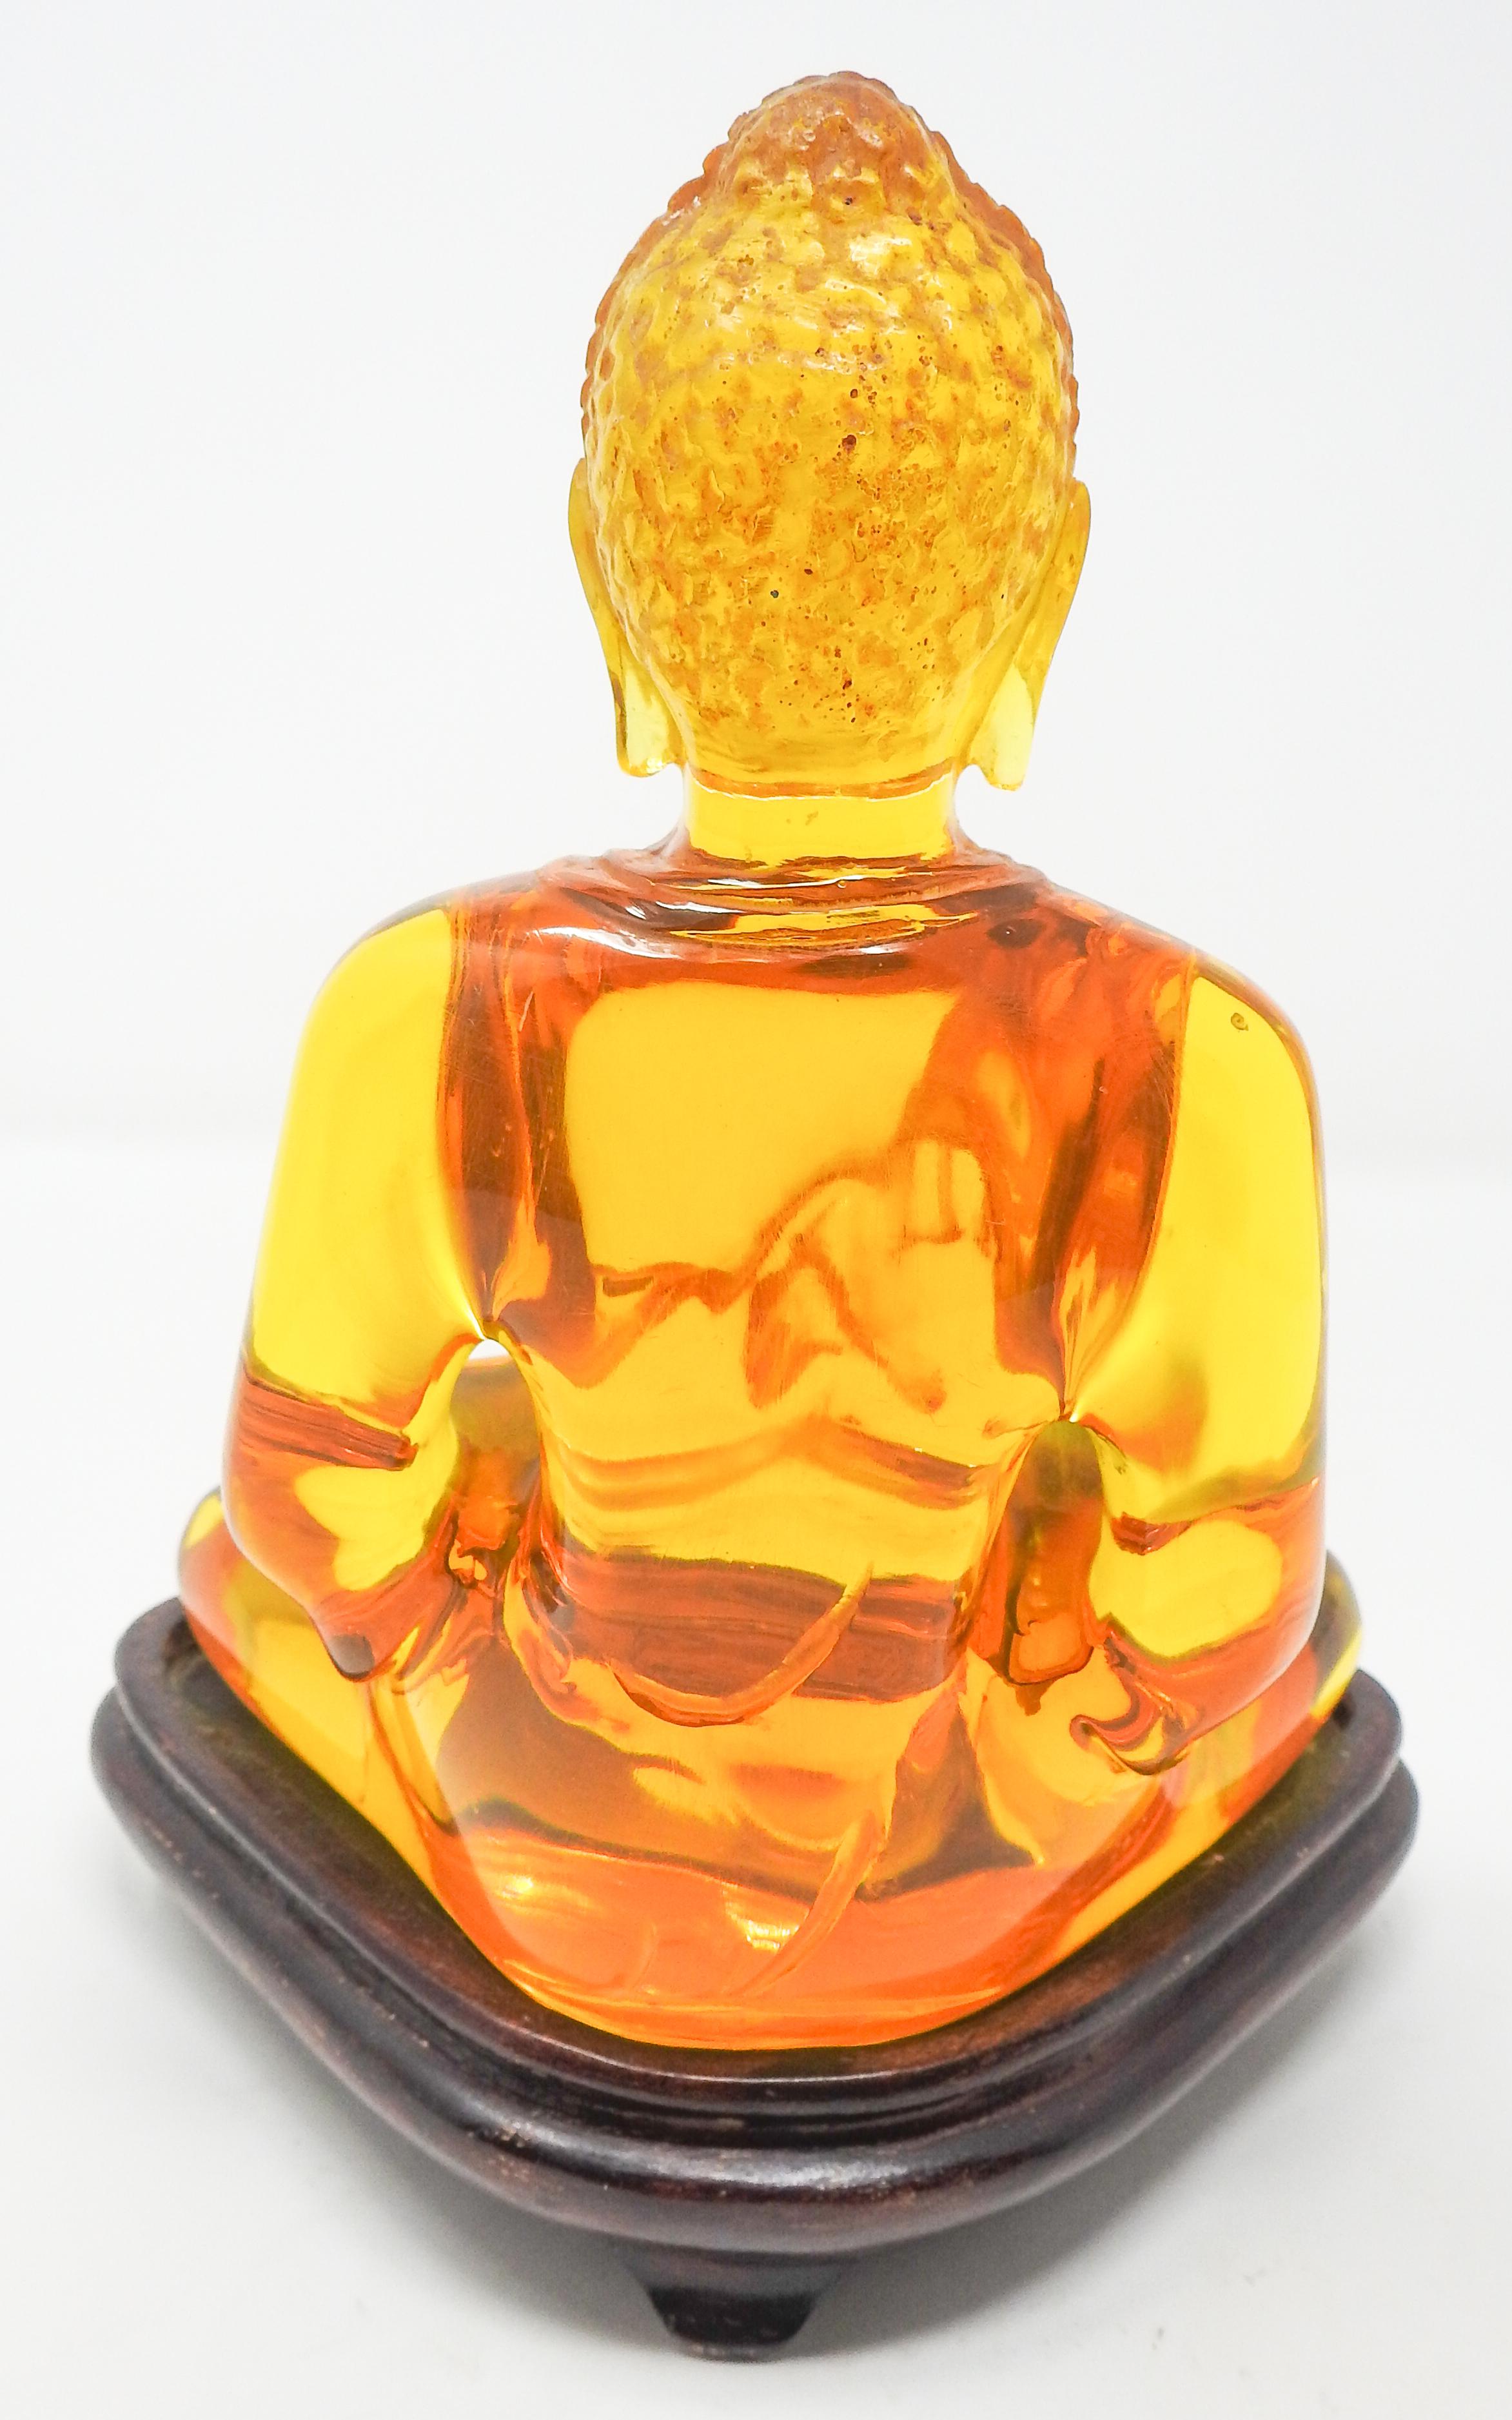 Hand-Carved Acrylic Amber Buddha Sculpture For Sale